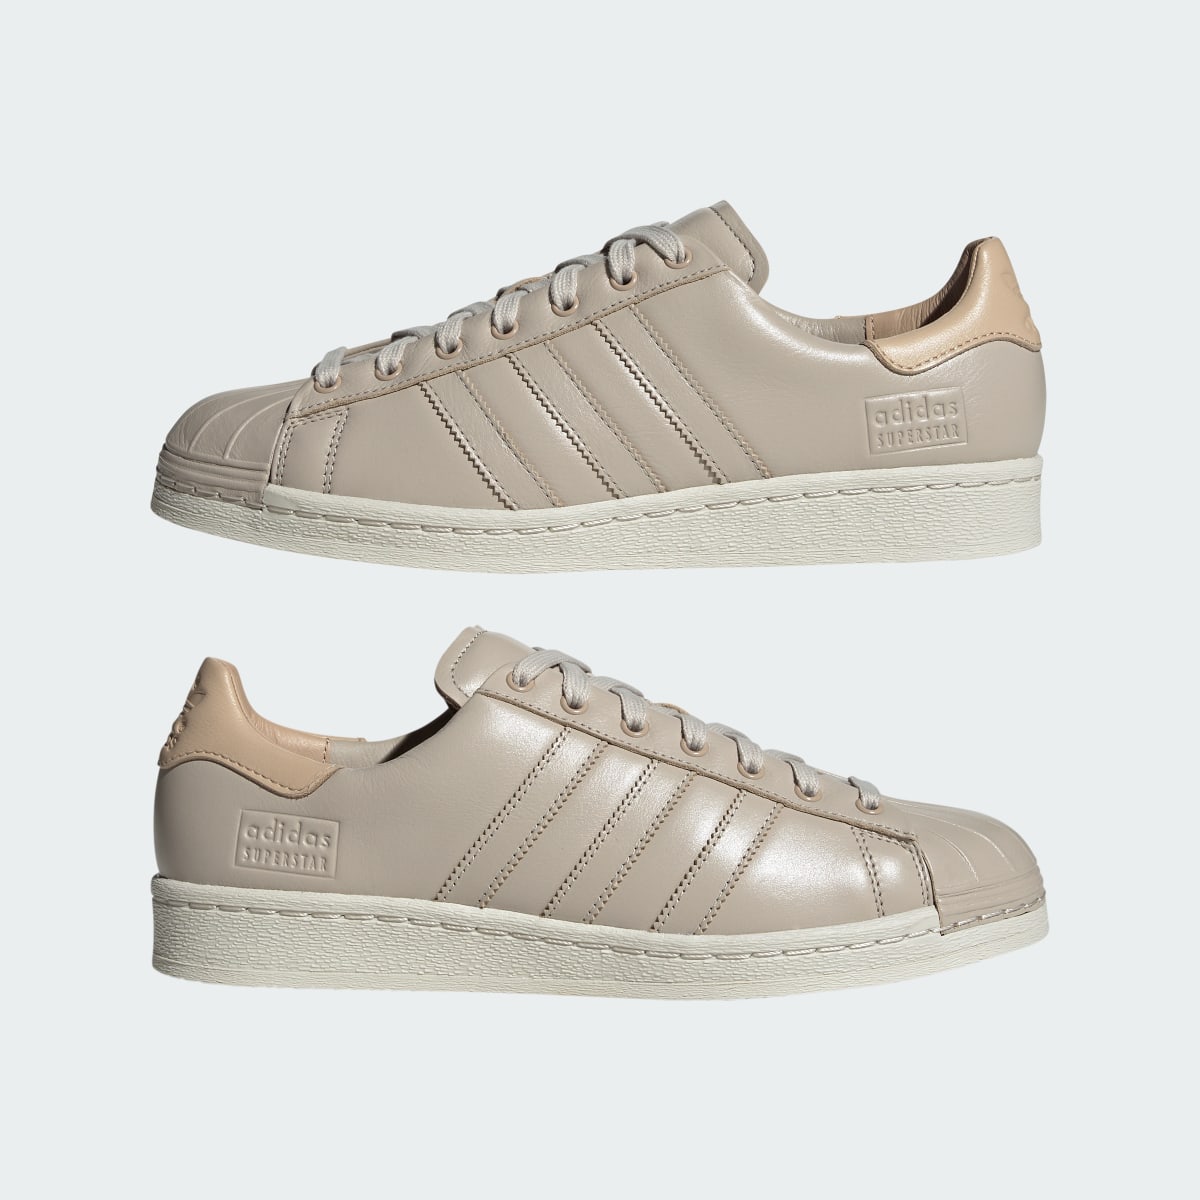 Adidas Superstar Lux Shoes. 8